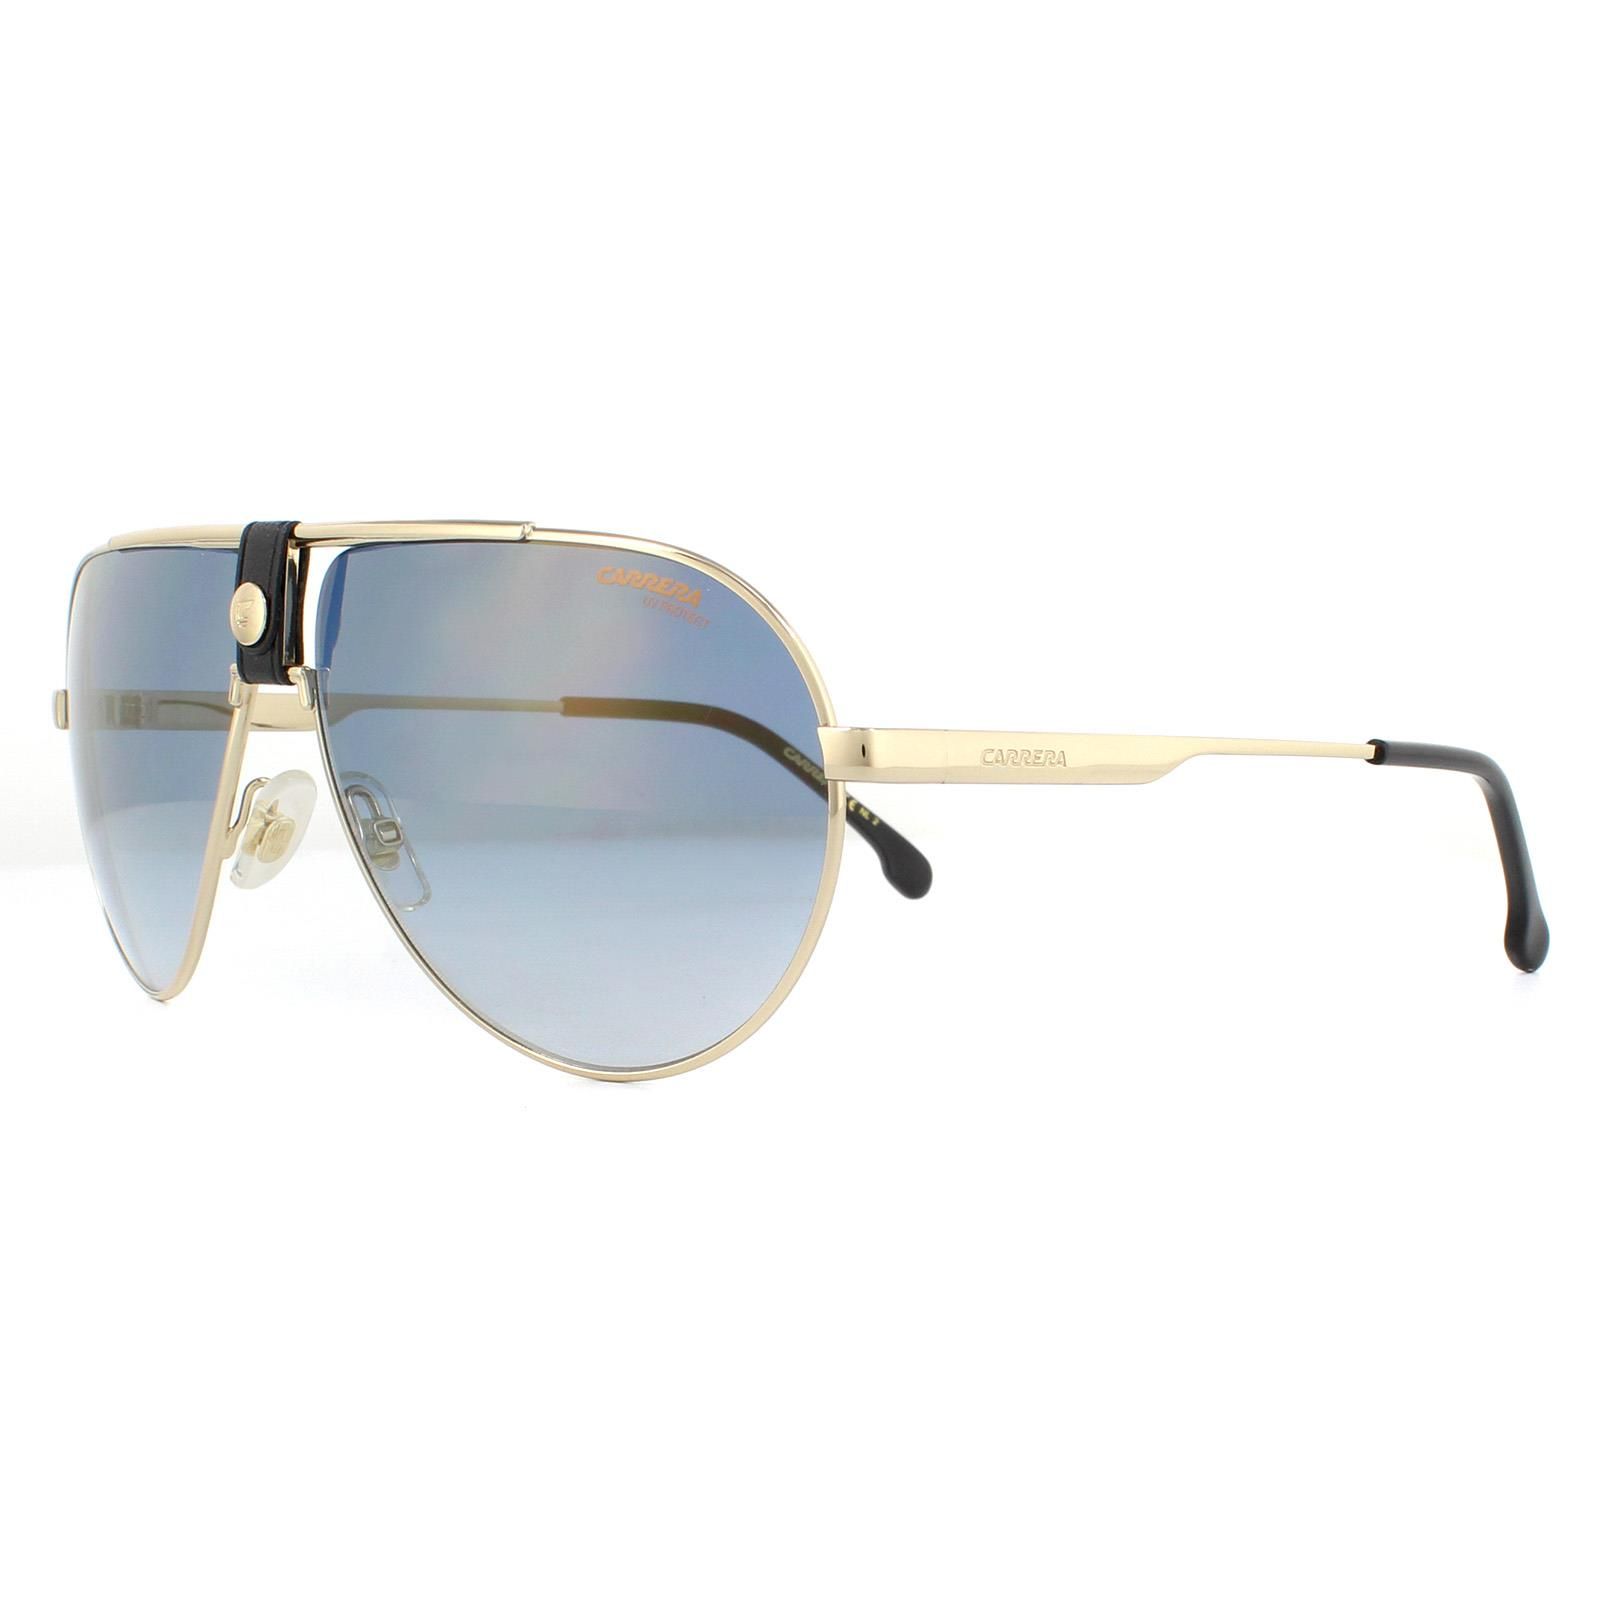 Carrera Sunglasses 1033/S 2M2 1V Black Gold Blue Gold Gradient Mirrorare a large aviator design crafted from lightweight metal. The distinctive double nose bridge features a bold leather front the Carrera C logo front and centre. The Carrera text logo is etched into the temples and finished with plastic tips for comfort.